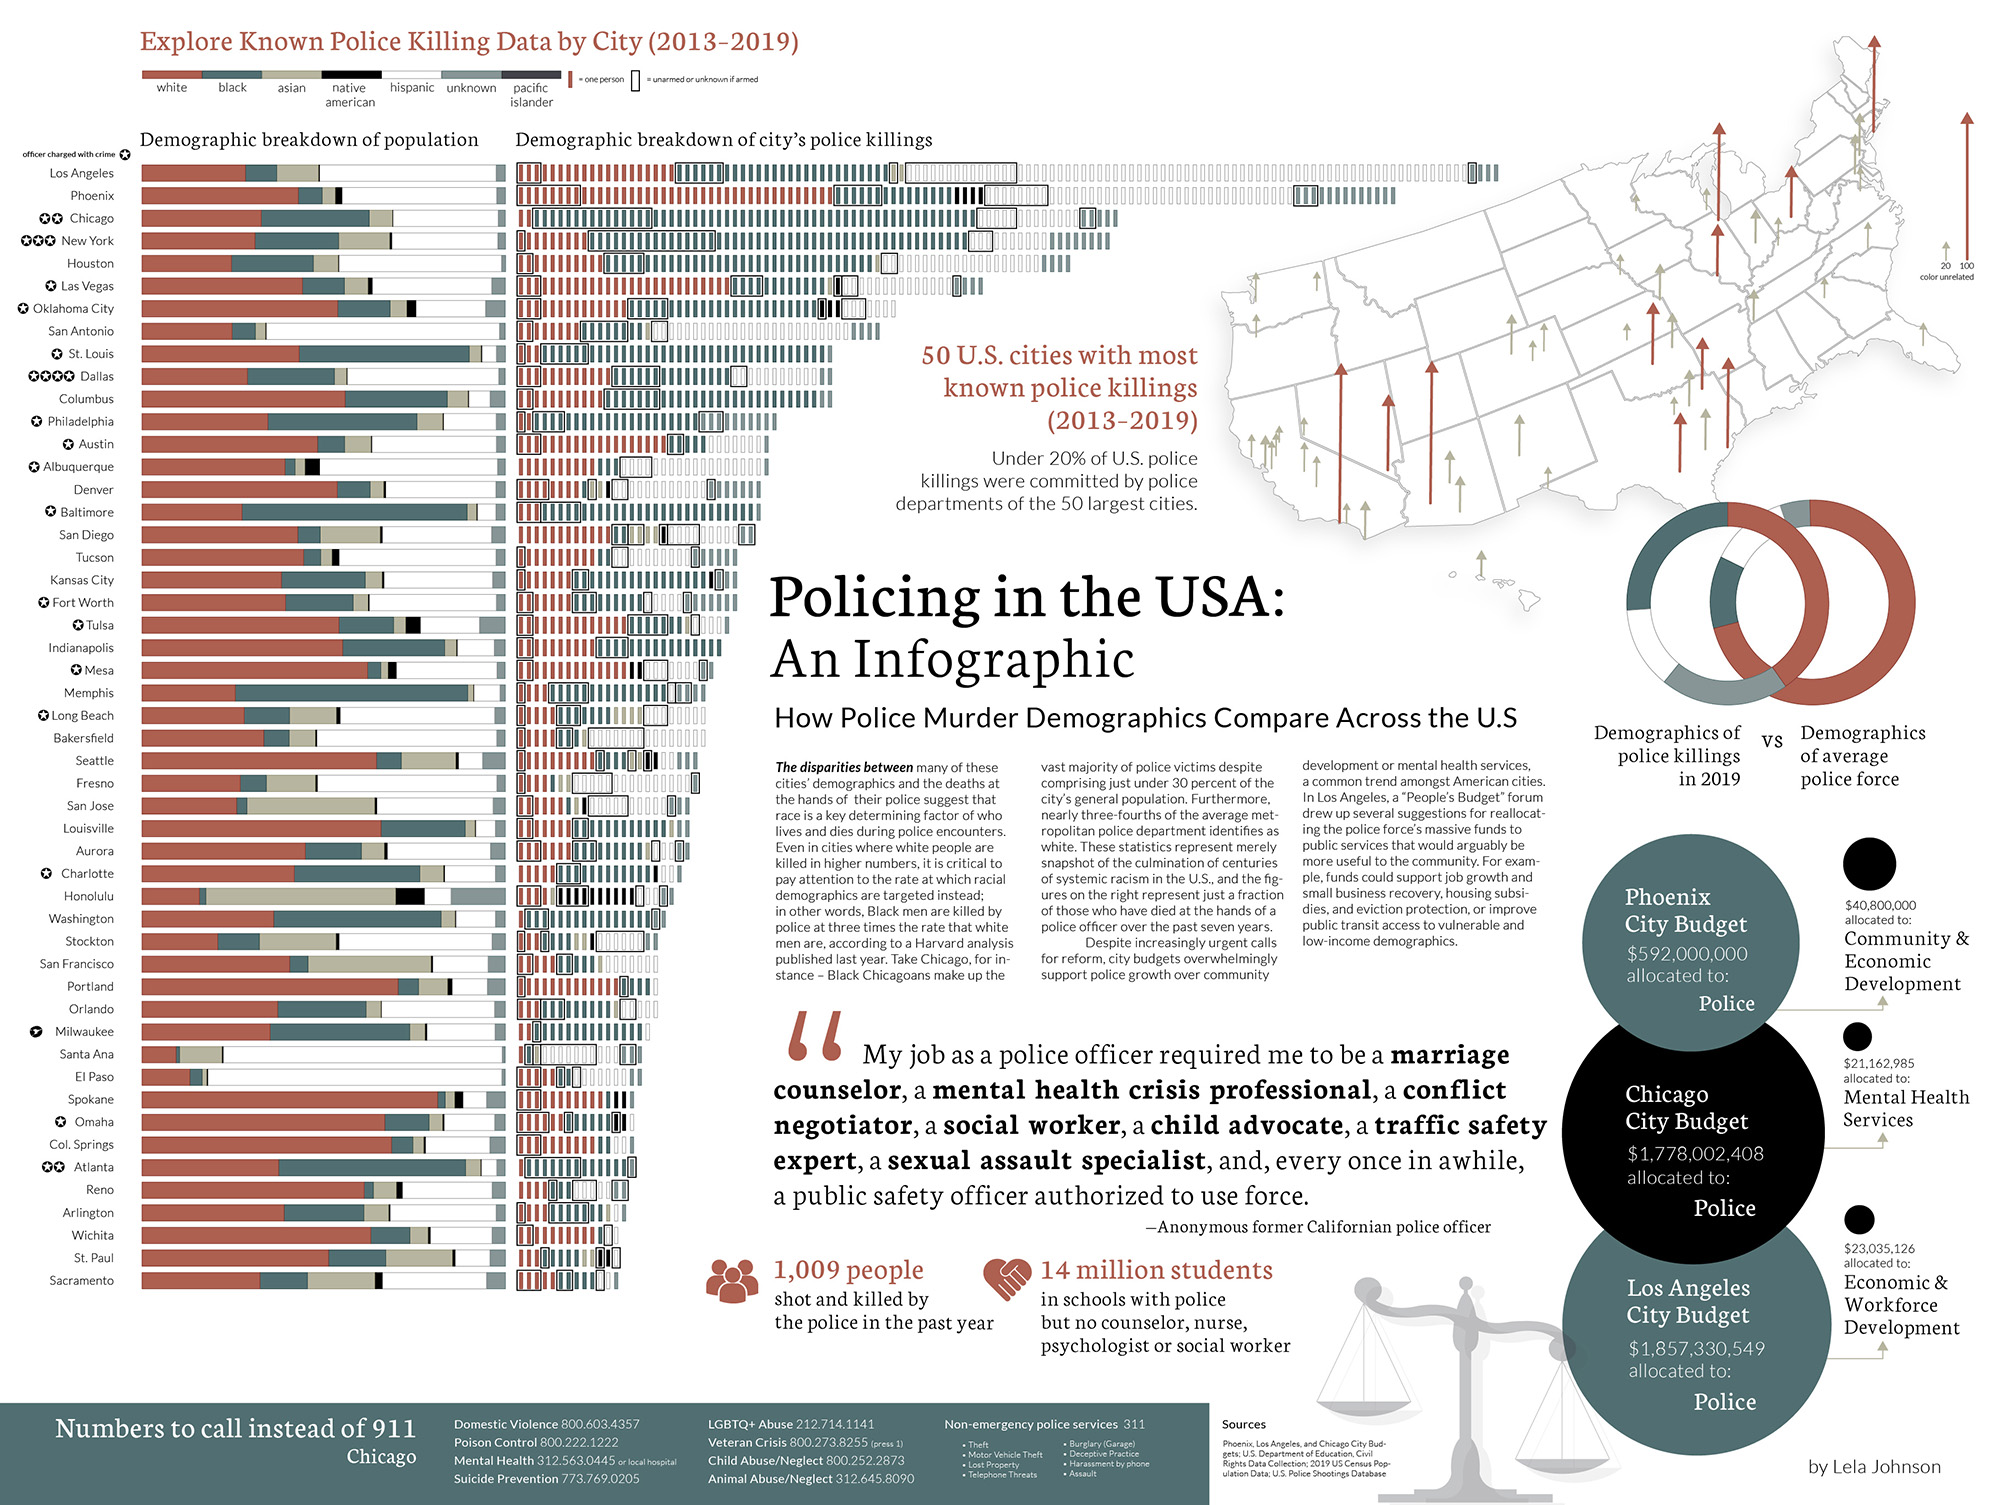 Lela Johnson - Policing in the USA: An Infographic